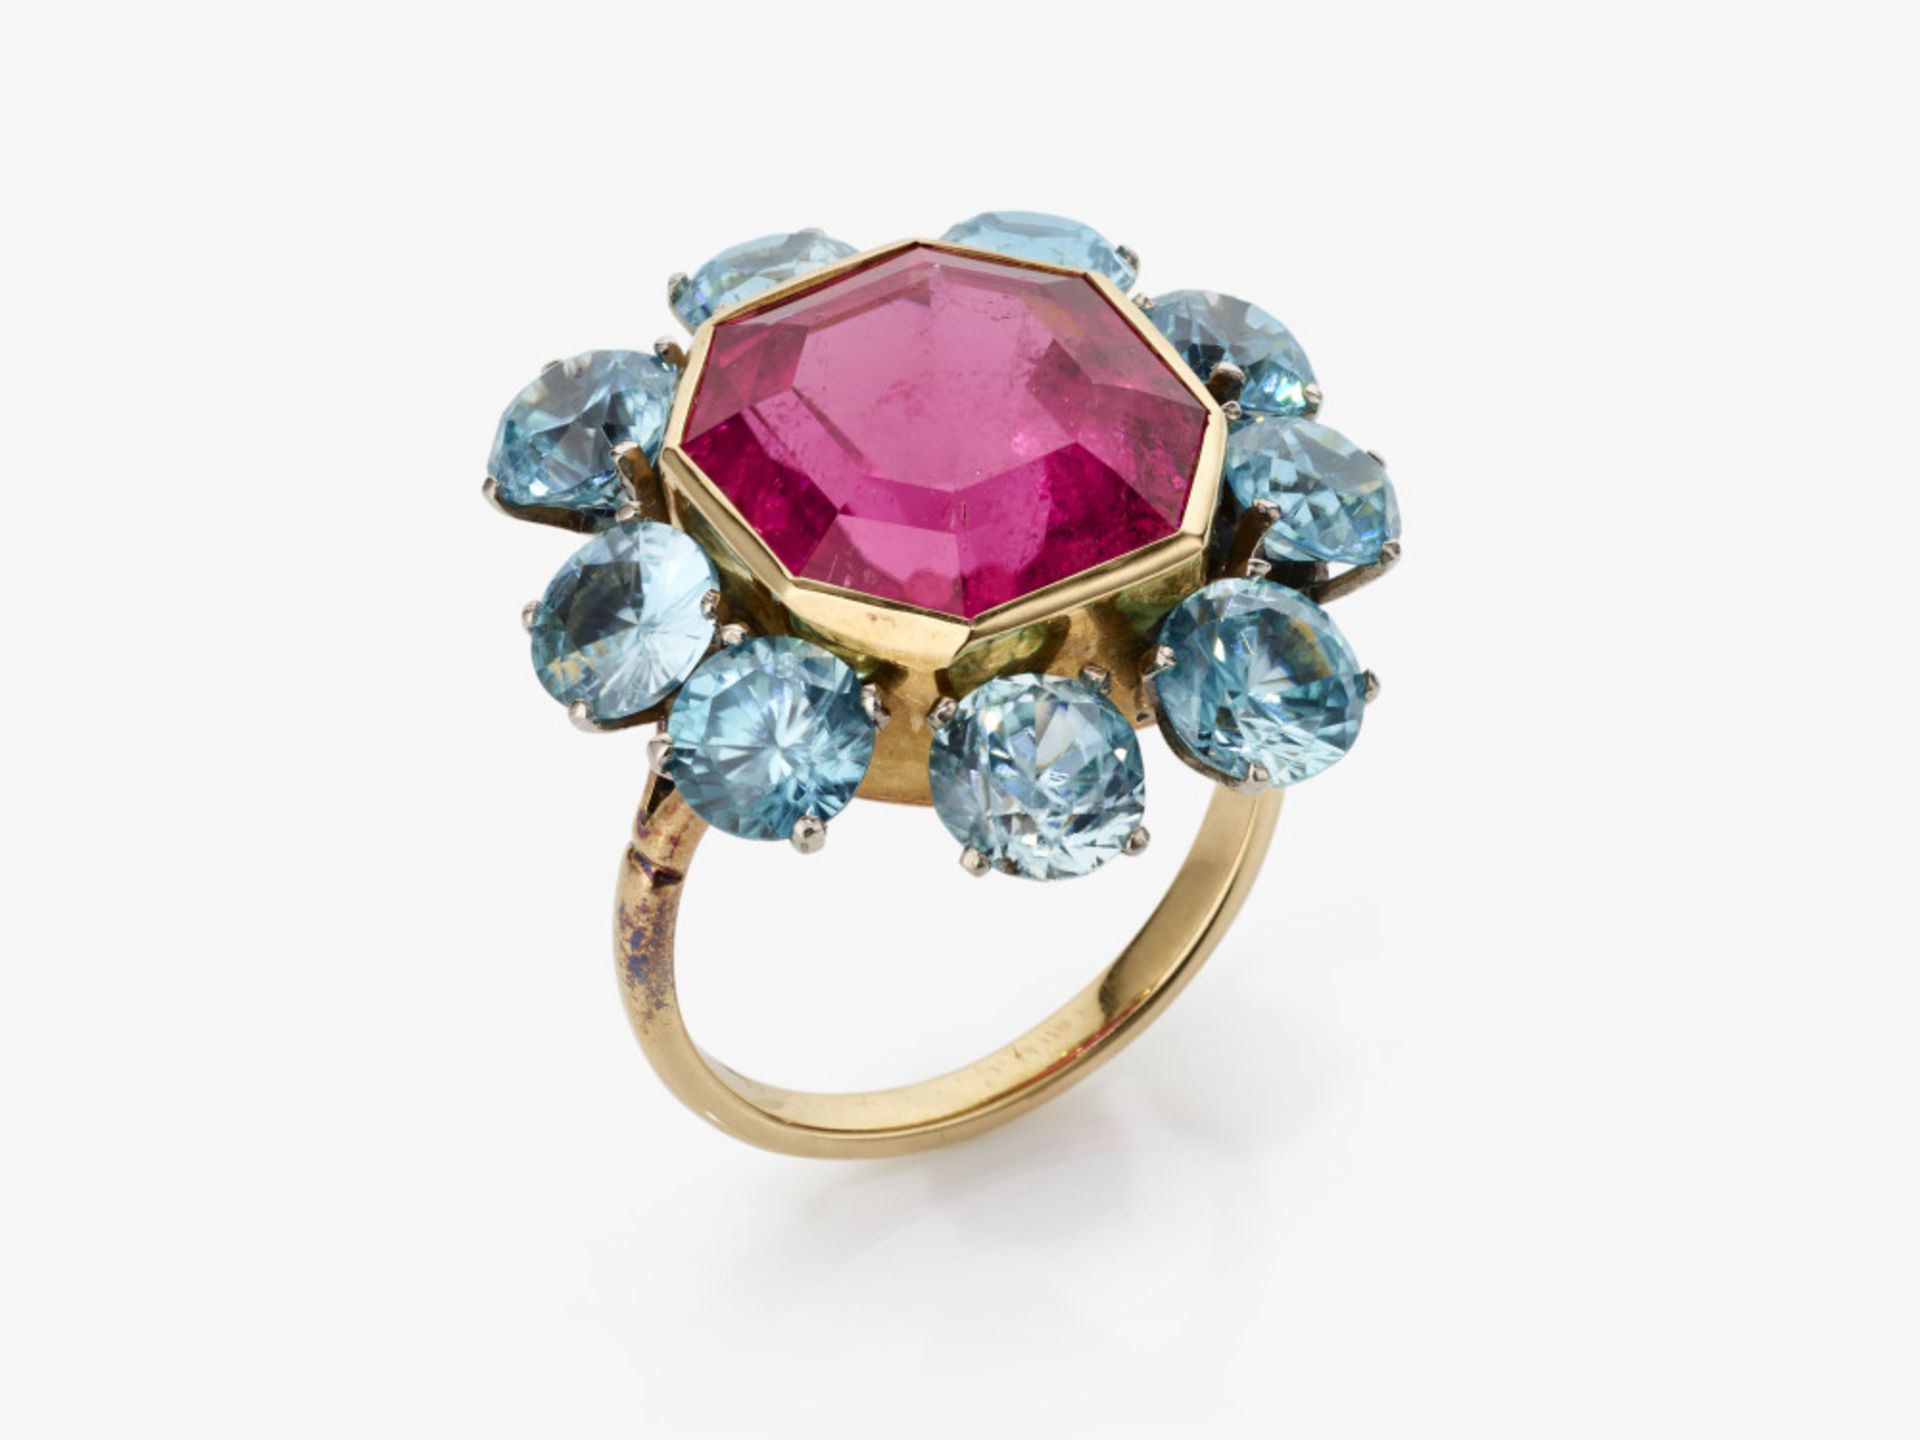 A historical cocktail ring with a rare "hot pink" rubellite and blue zircons